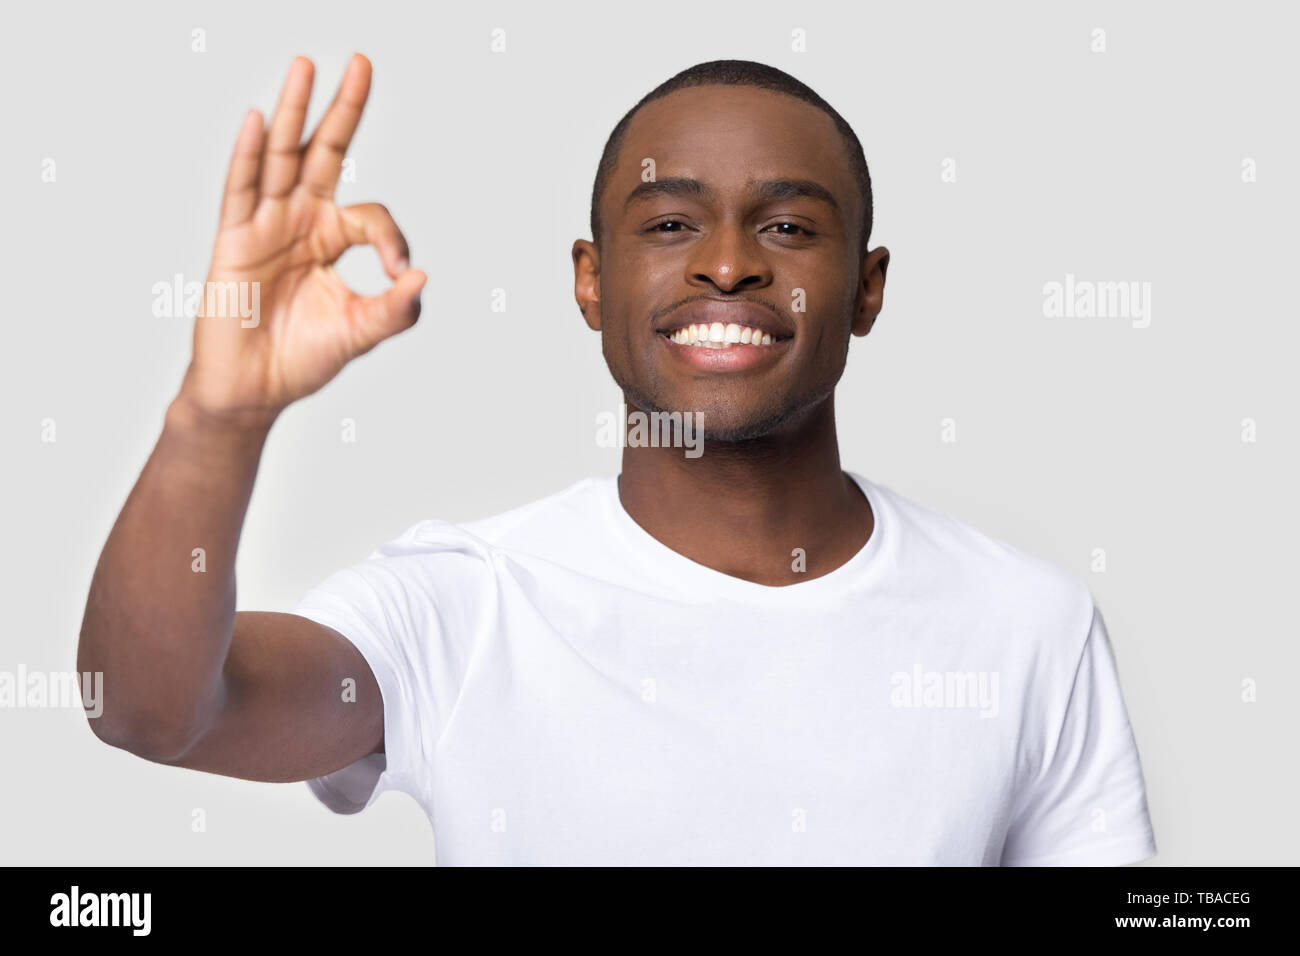 happy-african-male-showing-ok-sign-pose-on-grey-background-TBACEG.jpg